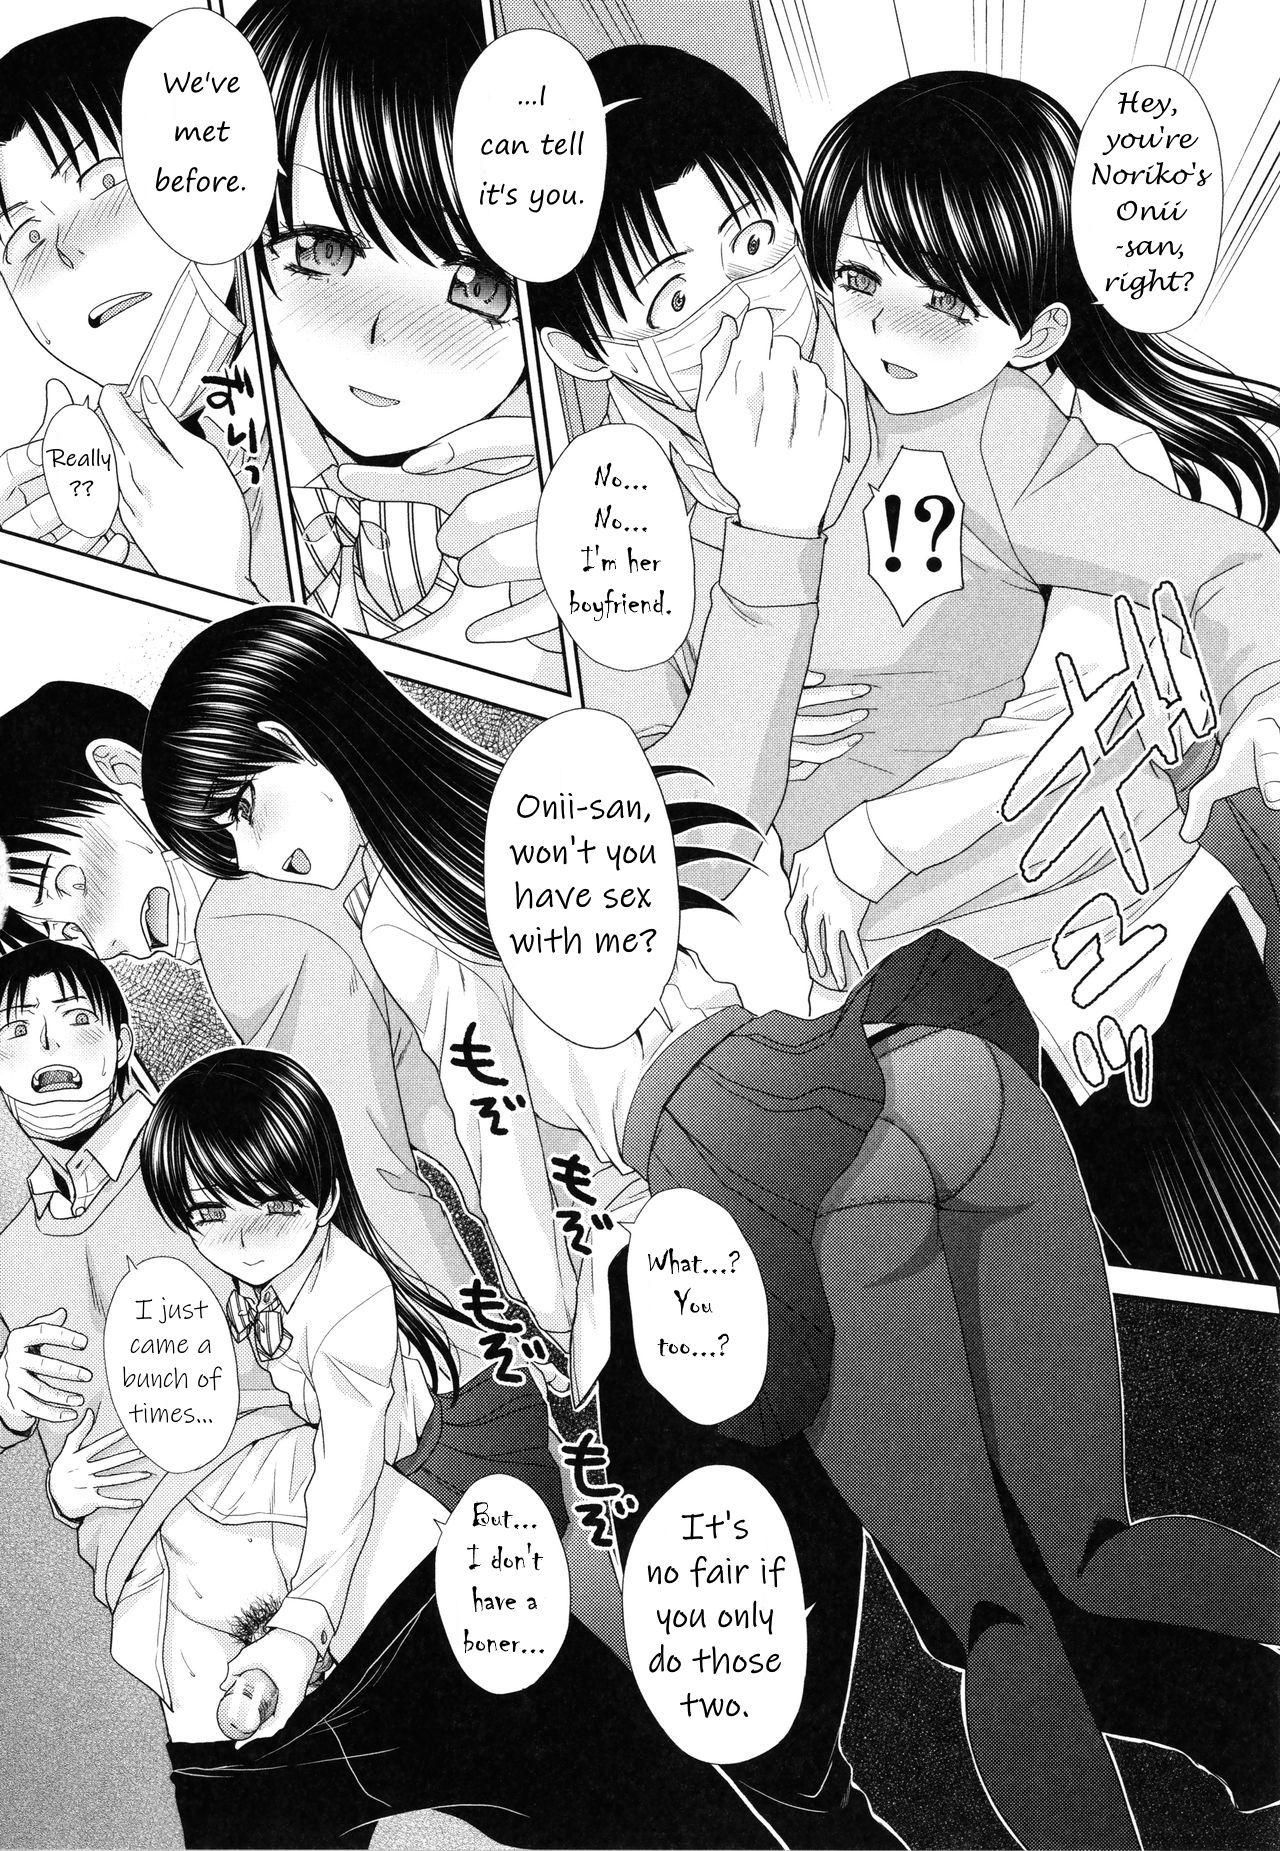 Imouto to Yatte Shimattashi, Imouto no Tomodachi to mo Yatte Shimatta | I had sex with my sister and then I had sex with her friends 65